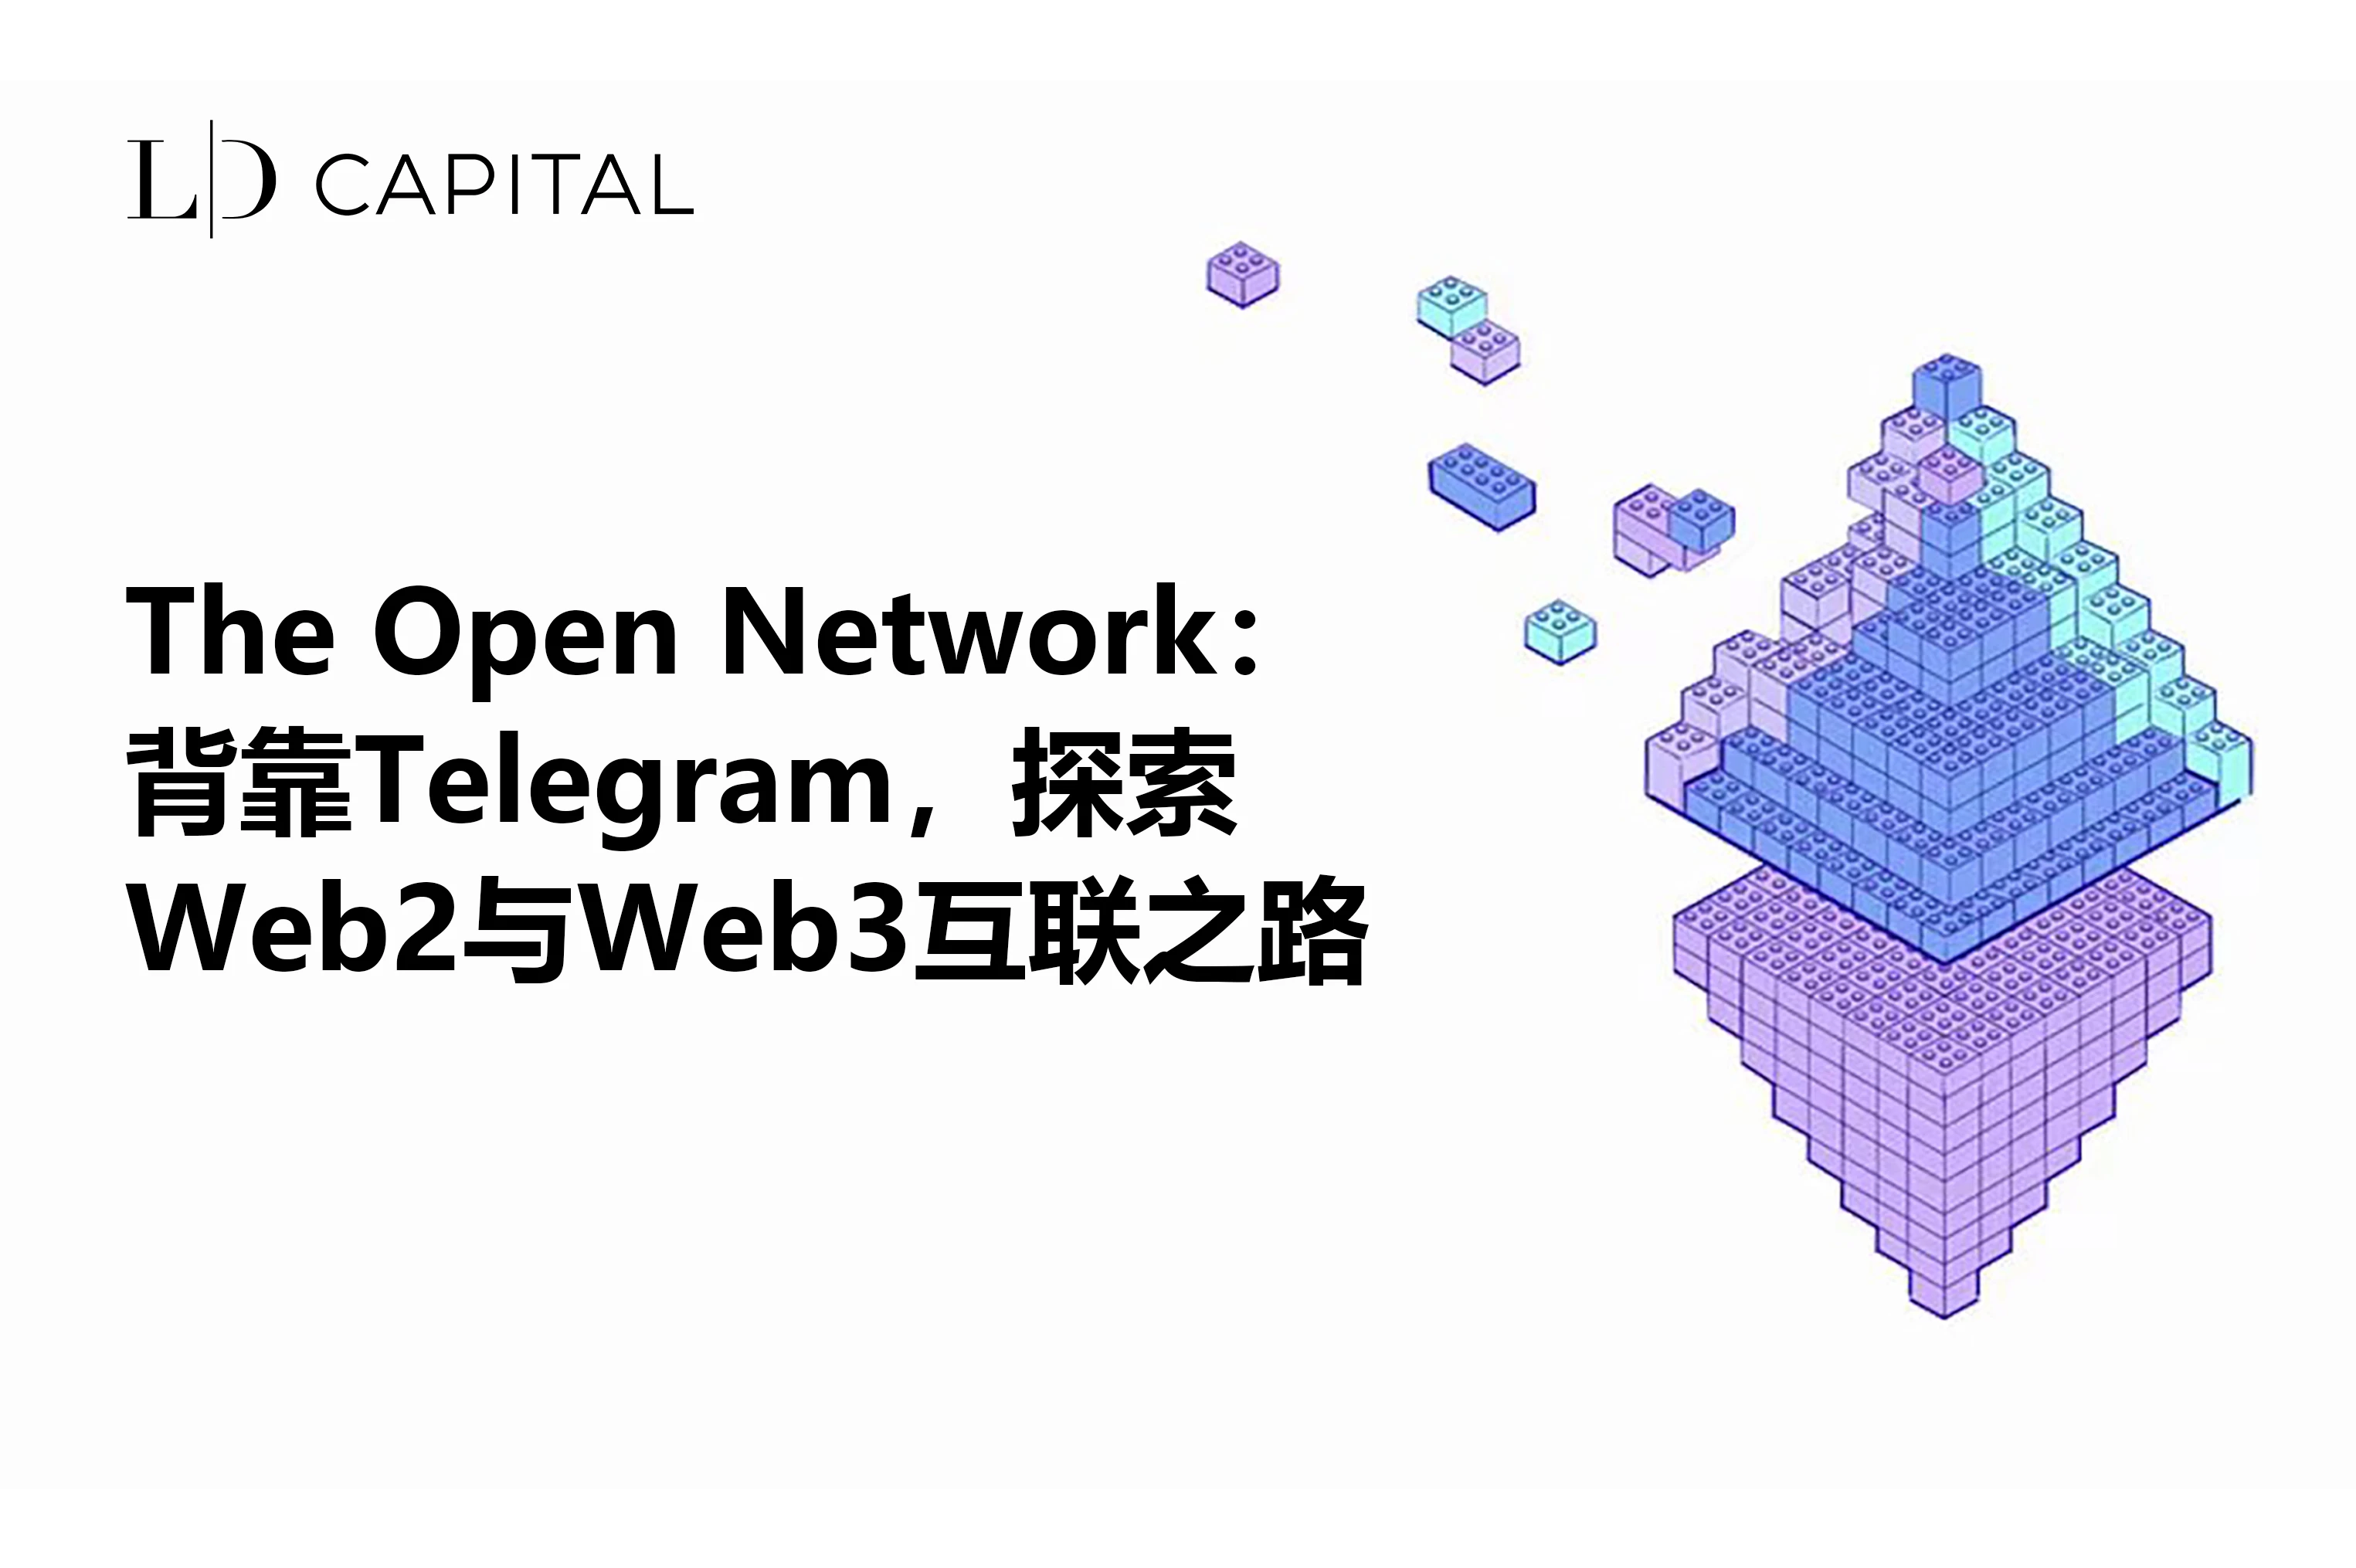 LD Capital: The Open Network, backed by Telegram, explores the path of interoperability between Web2 and Web3.